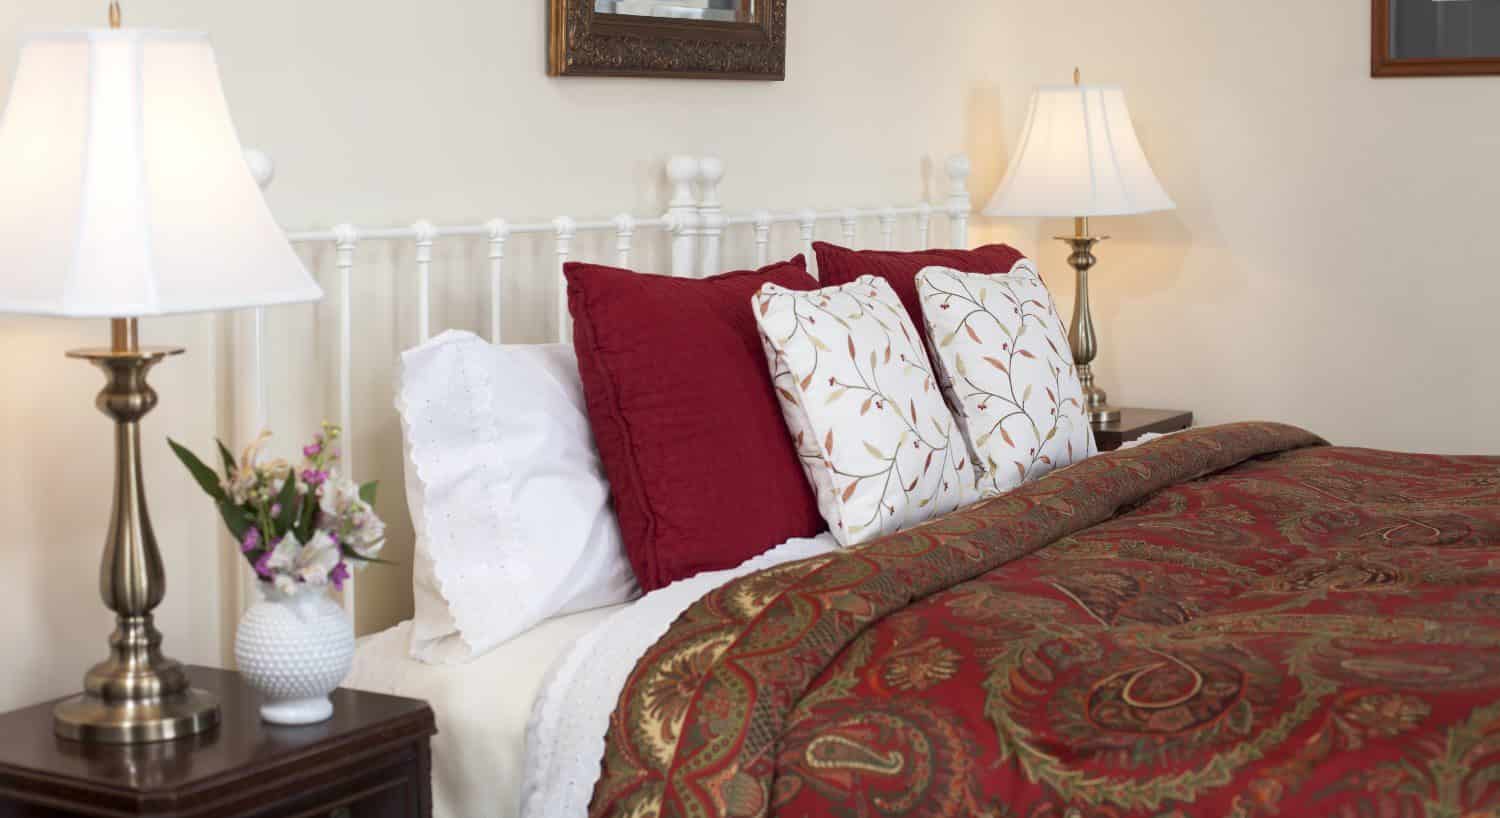 Bedroom with white walls, white painted wrought iron headboard, red and gold paisley bedding, and dark wooden furniture